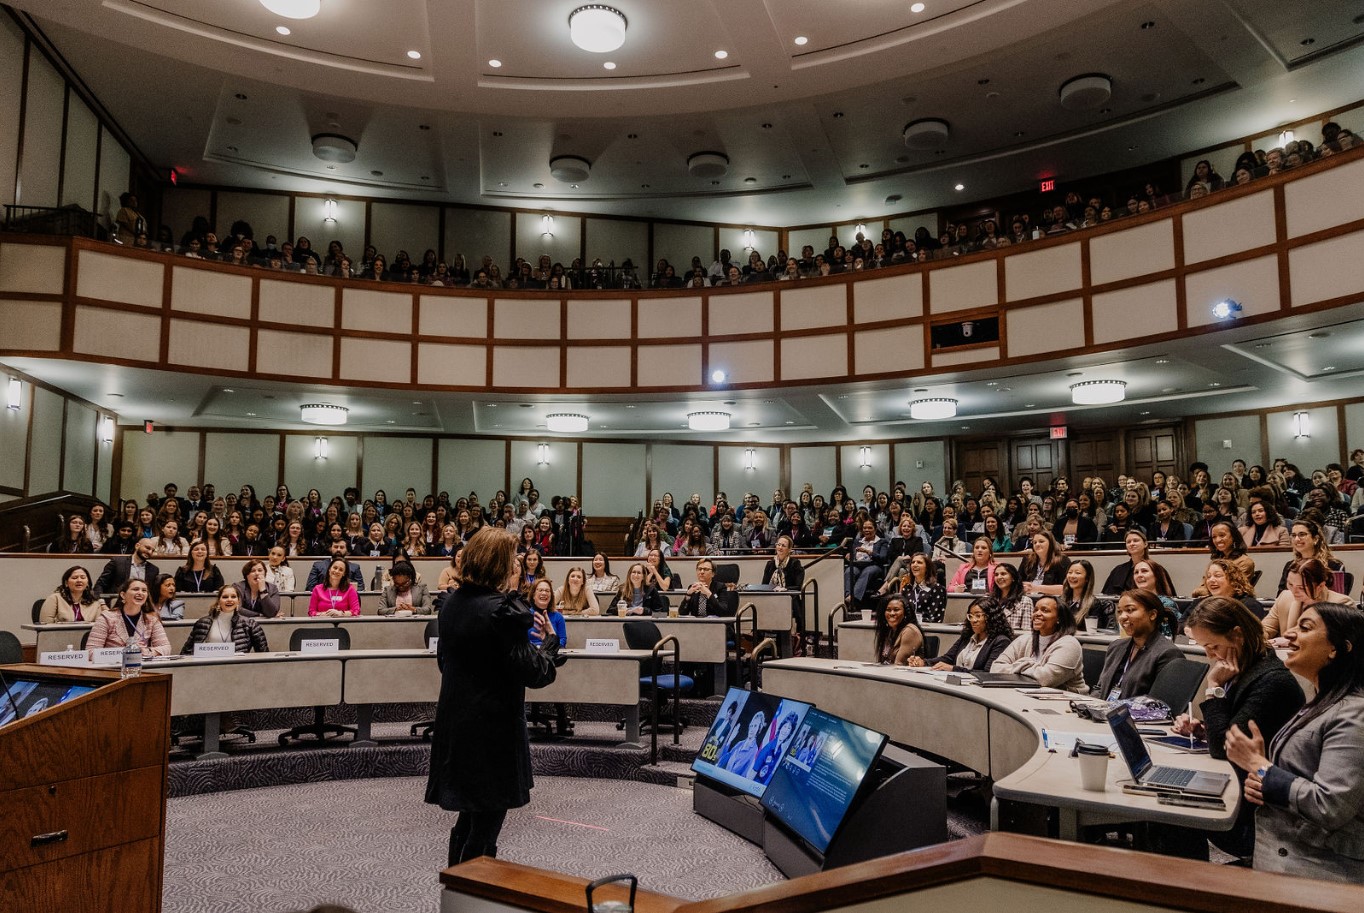 Women in Leadership Conference (WILC) at Rice University School of Business.